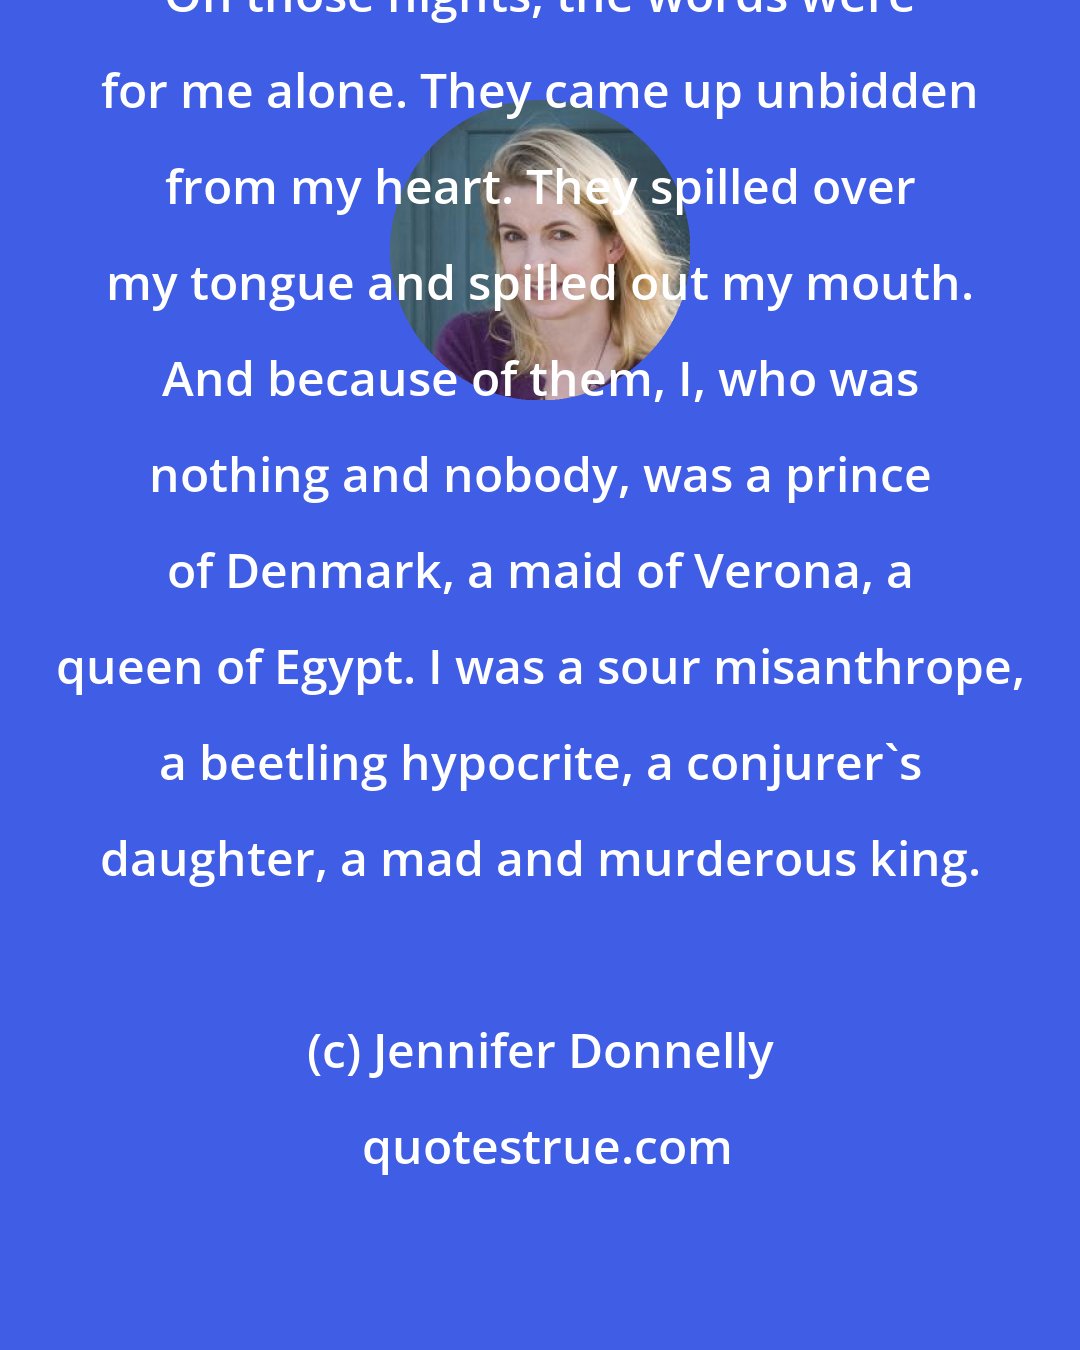 Jennifer Donnelly: On those nights, the words were for me alone. They came up unbidden from my heart. They spilled over my tongue and spilled out my mouth. And because of them, I, who was nothing and nobody, was a prince of Denmark, a maid of Verona, a queen of Egypt. I was a sour misanthrope, a beetling hypocrite, a conjurer's daughter, a mad and murderous king.